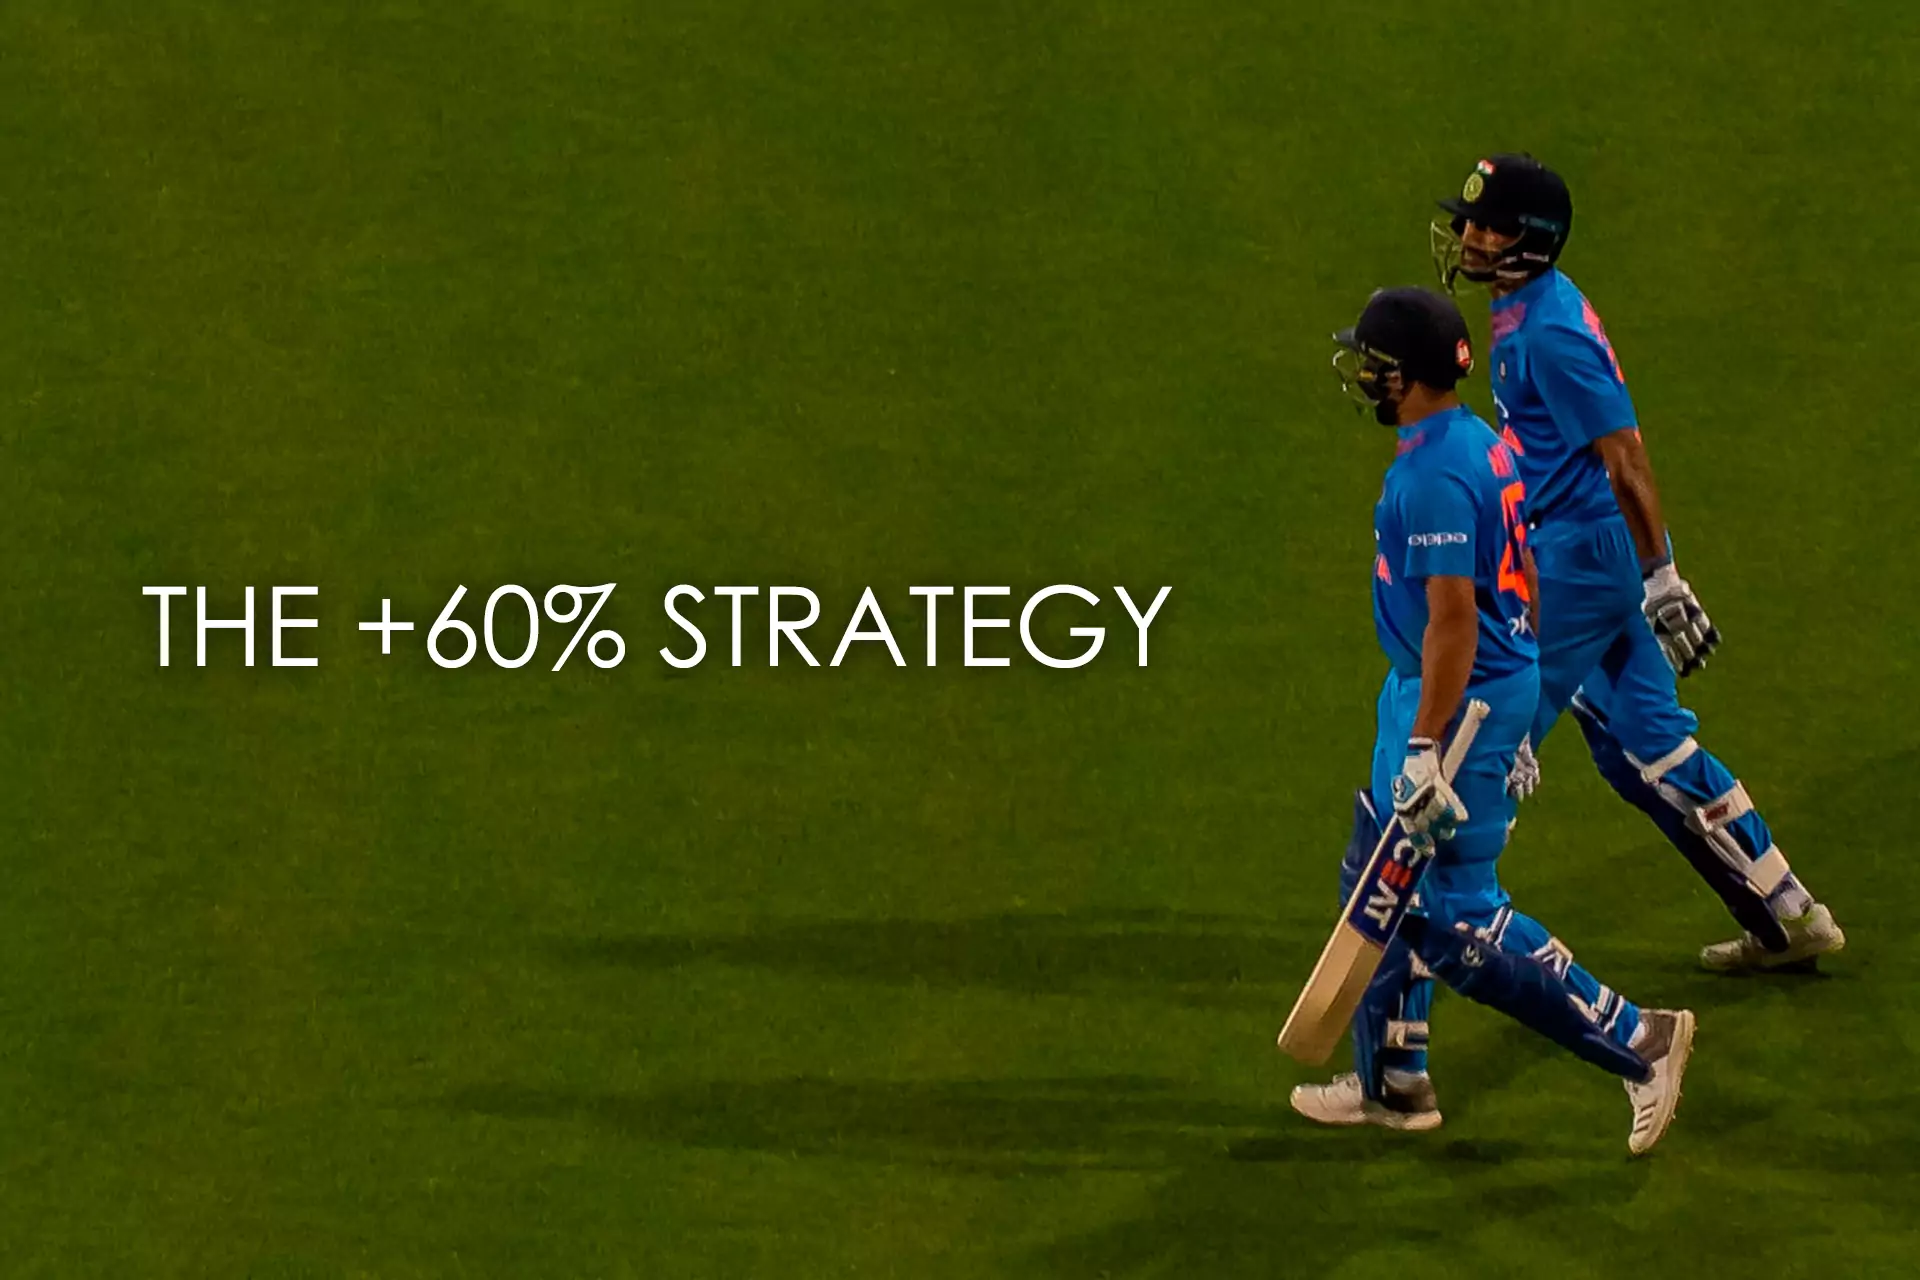 The goal of the +60 Strategy is to avoid a losing streak of 5 bets.